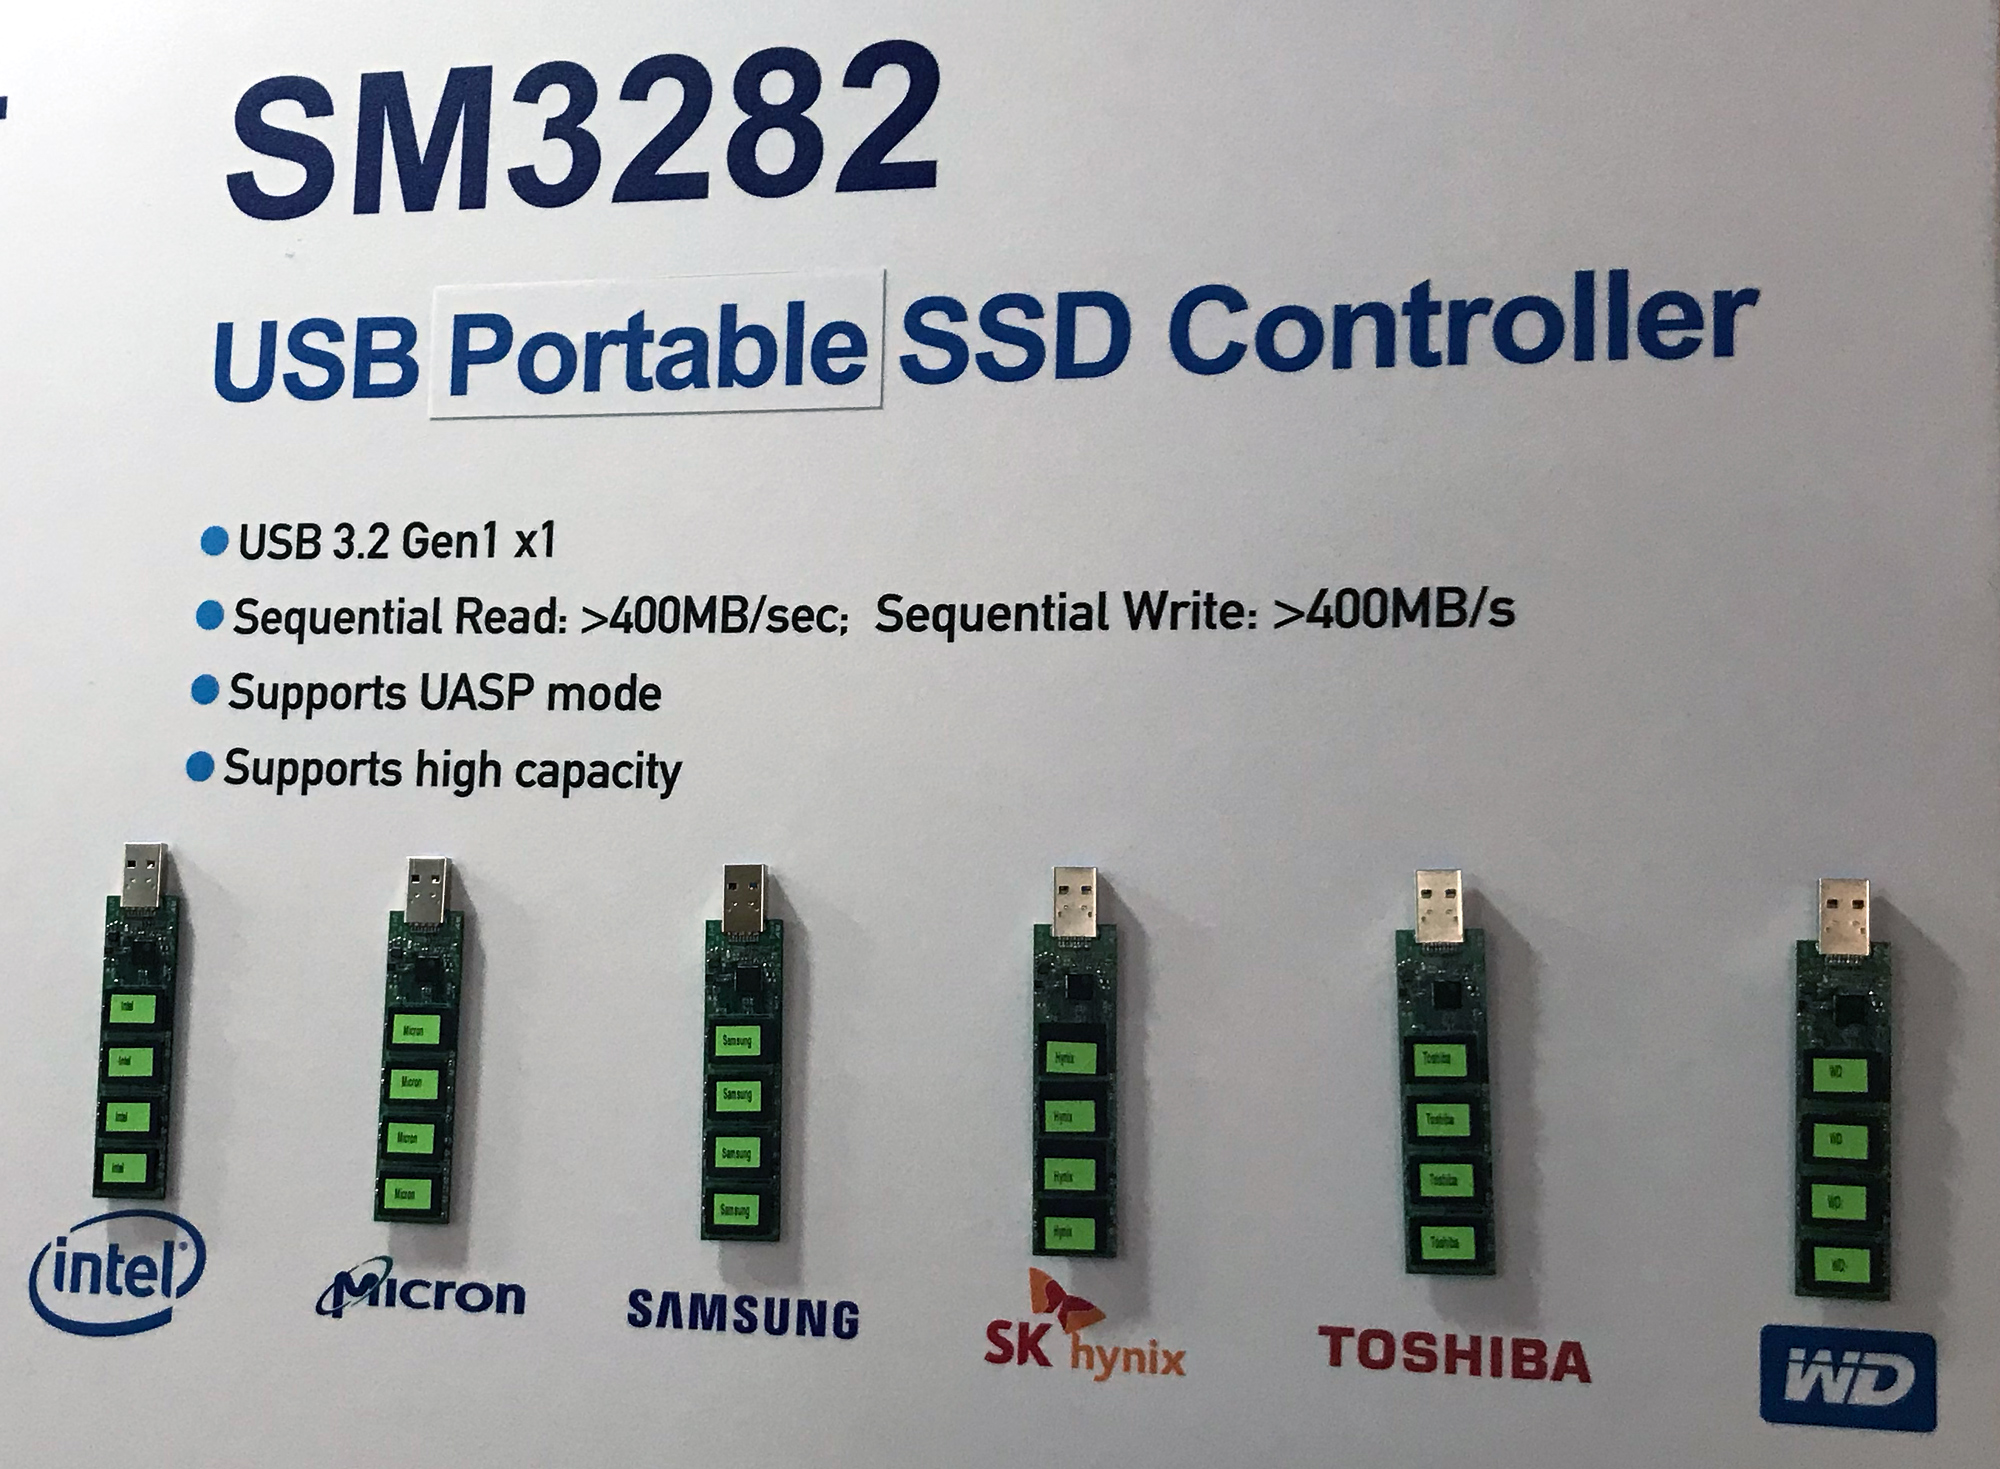 USB Stick as SSD? A New Silicon Motion SM3282 Single-Chip Controller for USB SSDs